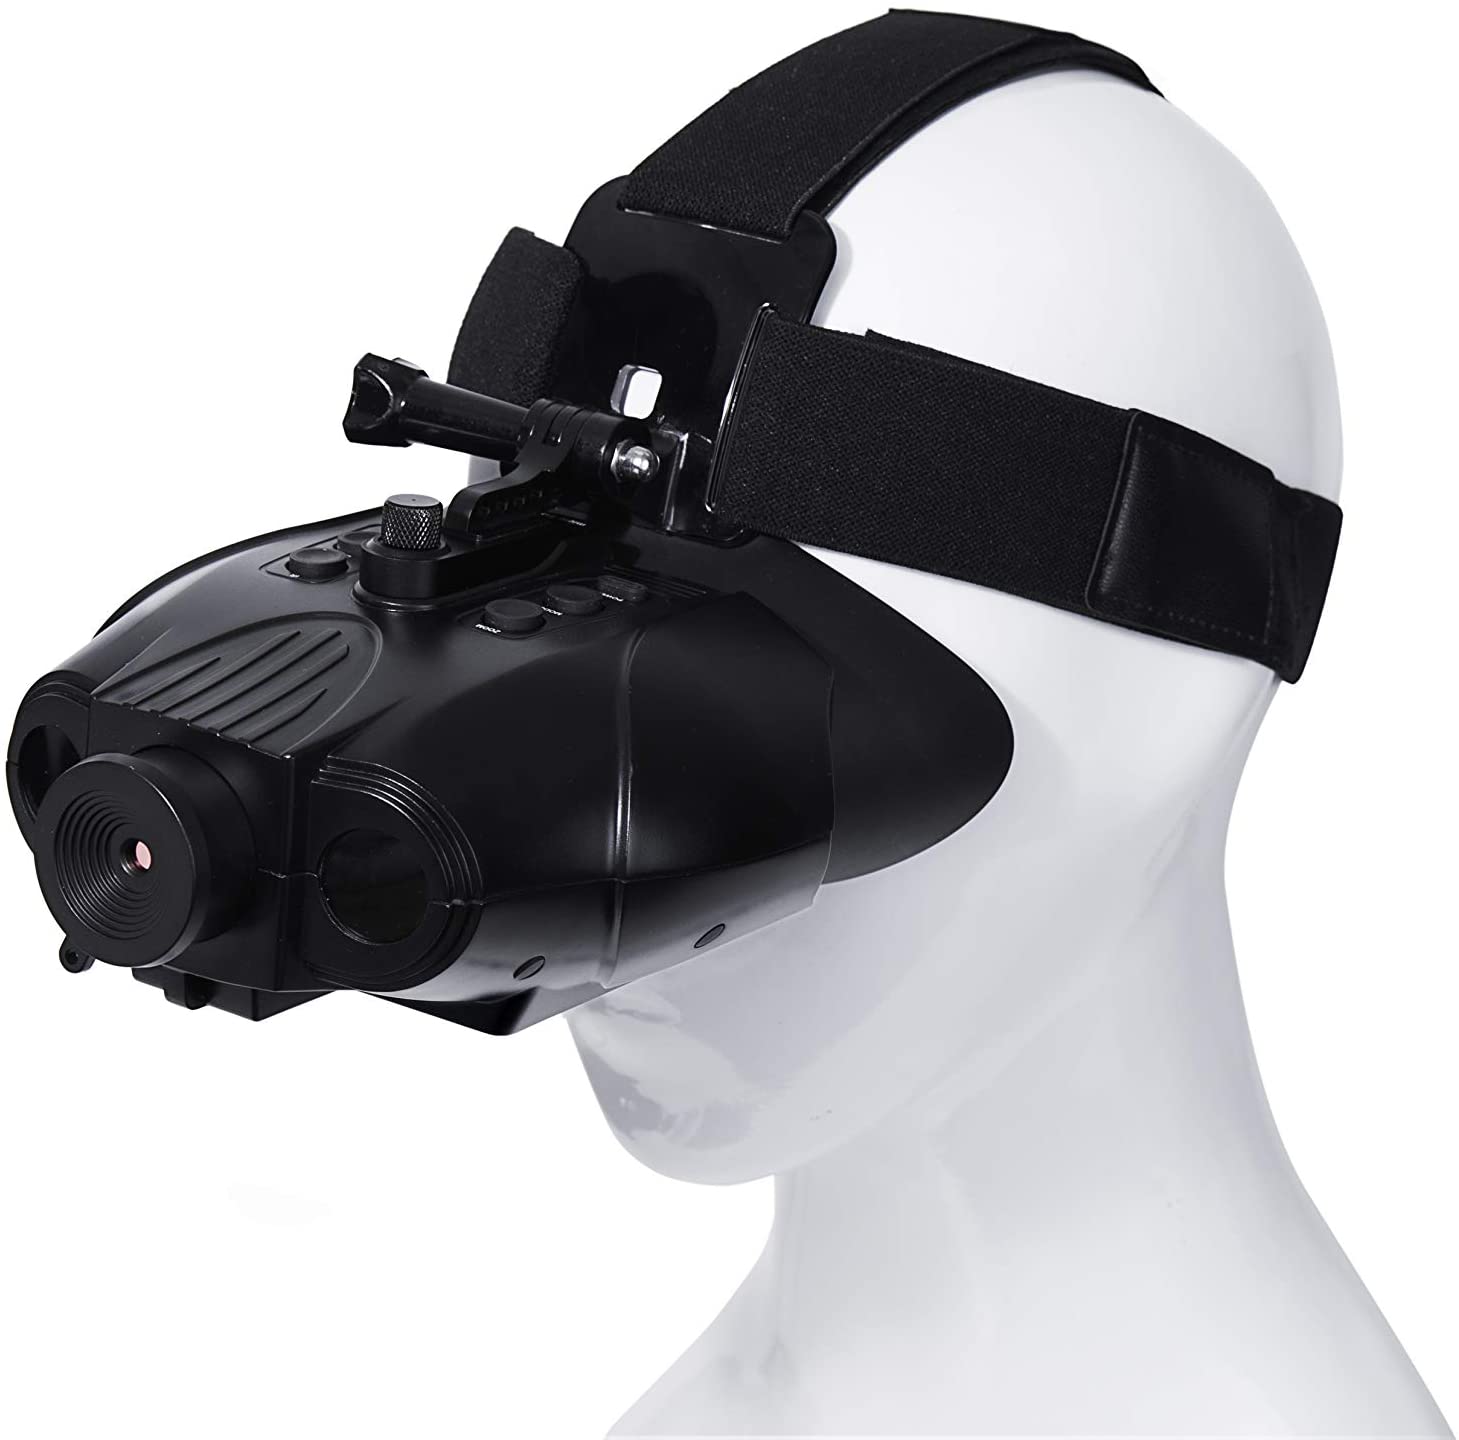 X-Vision Hands-Free Night Vision Deluxe Goggles XANB50